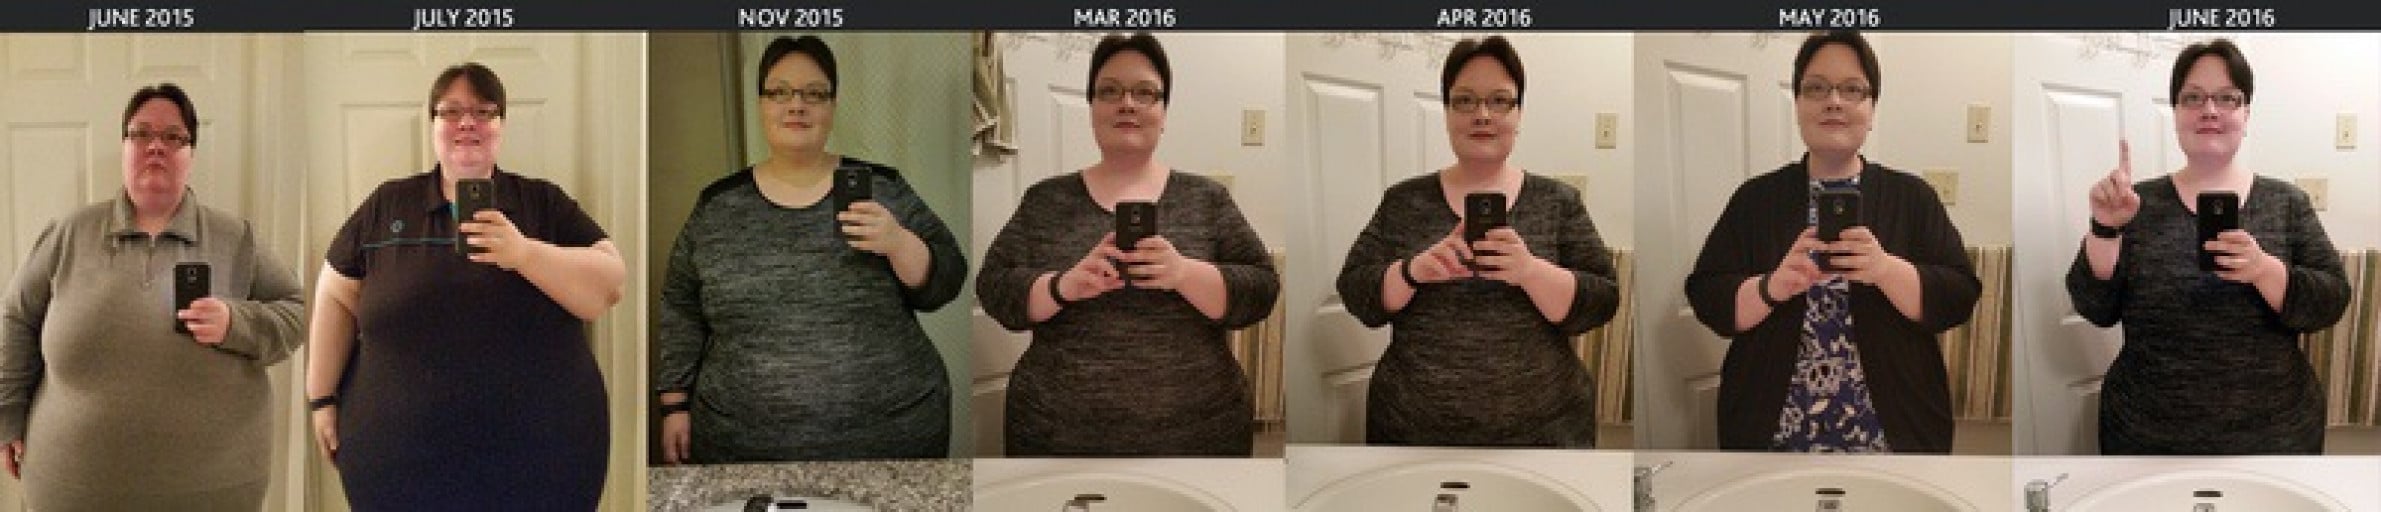 A progress pic of a 5'3" woman showing a fat loss from 495 pounds to 322 pounds. A total loss of 173 pounds.